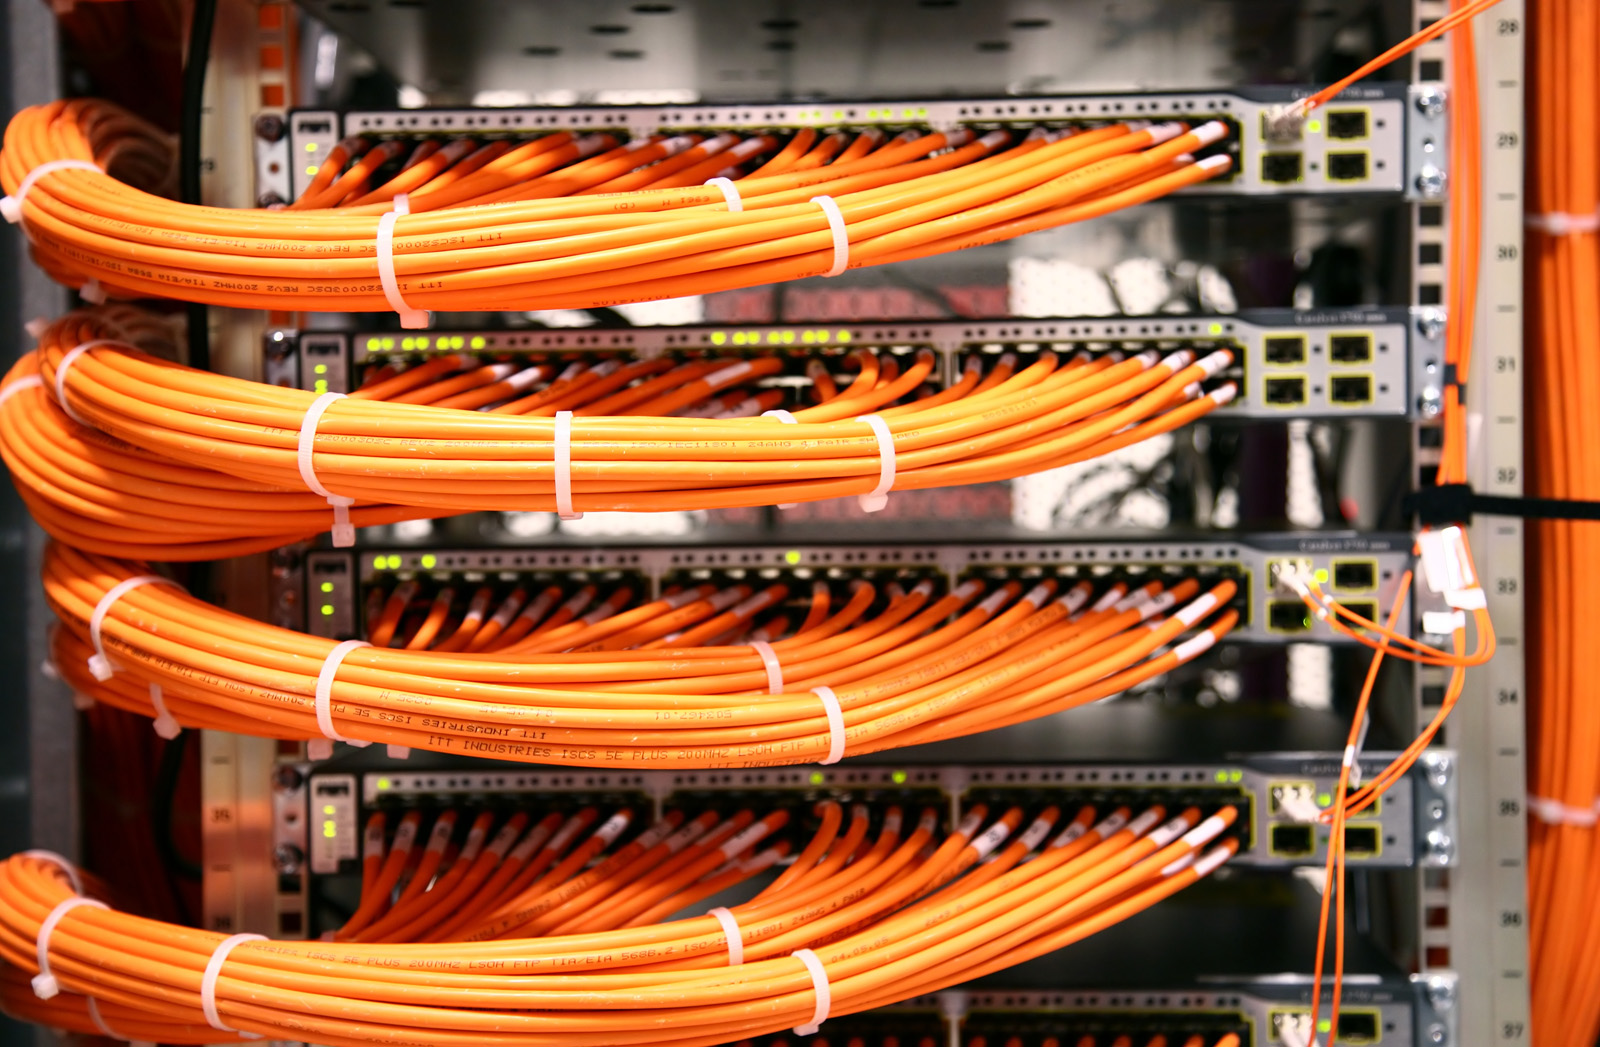 Cloverport Kentucky High Quality Voice & Data Network Cabling Provider